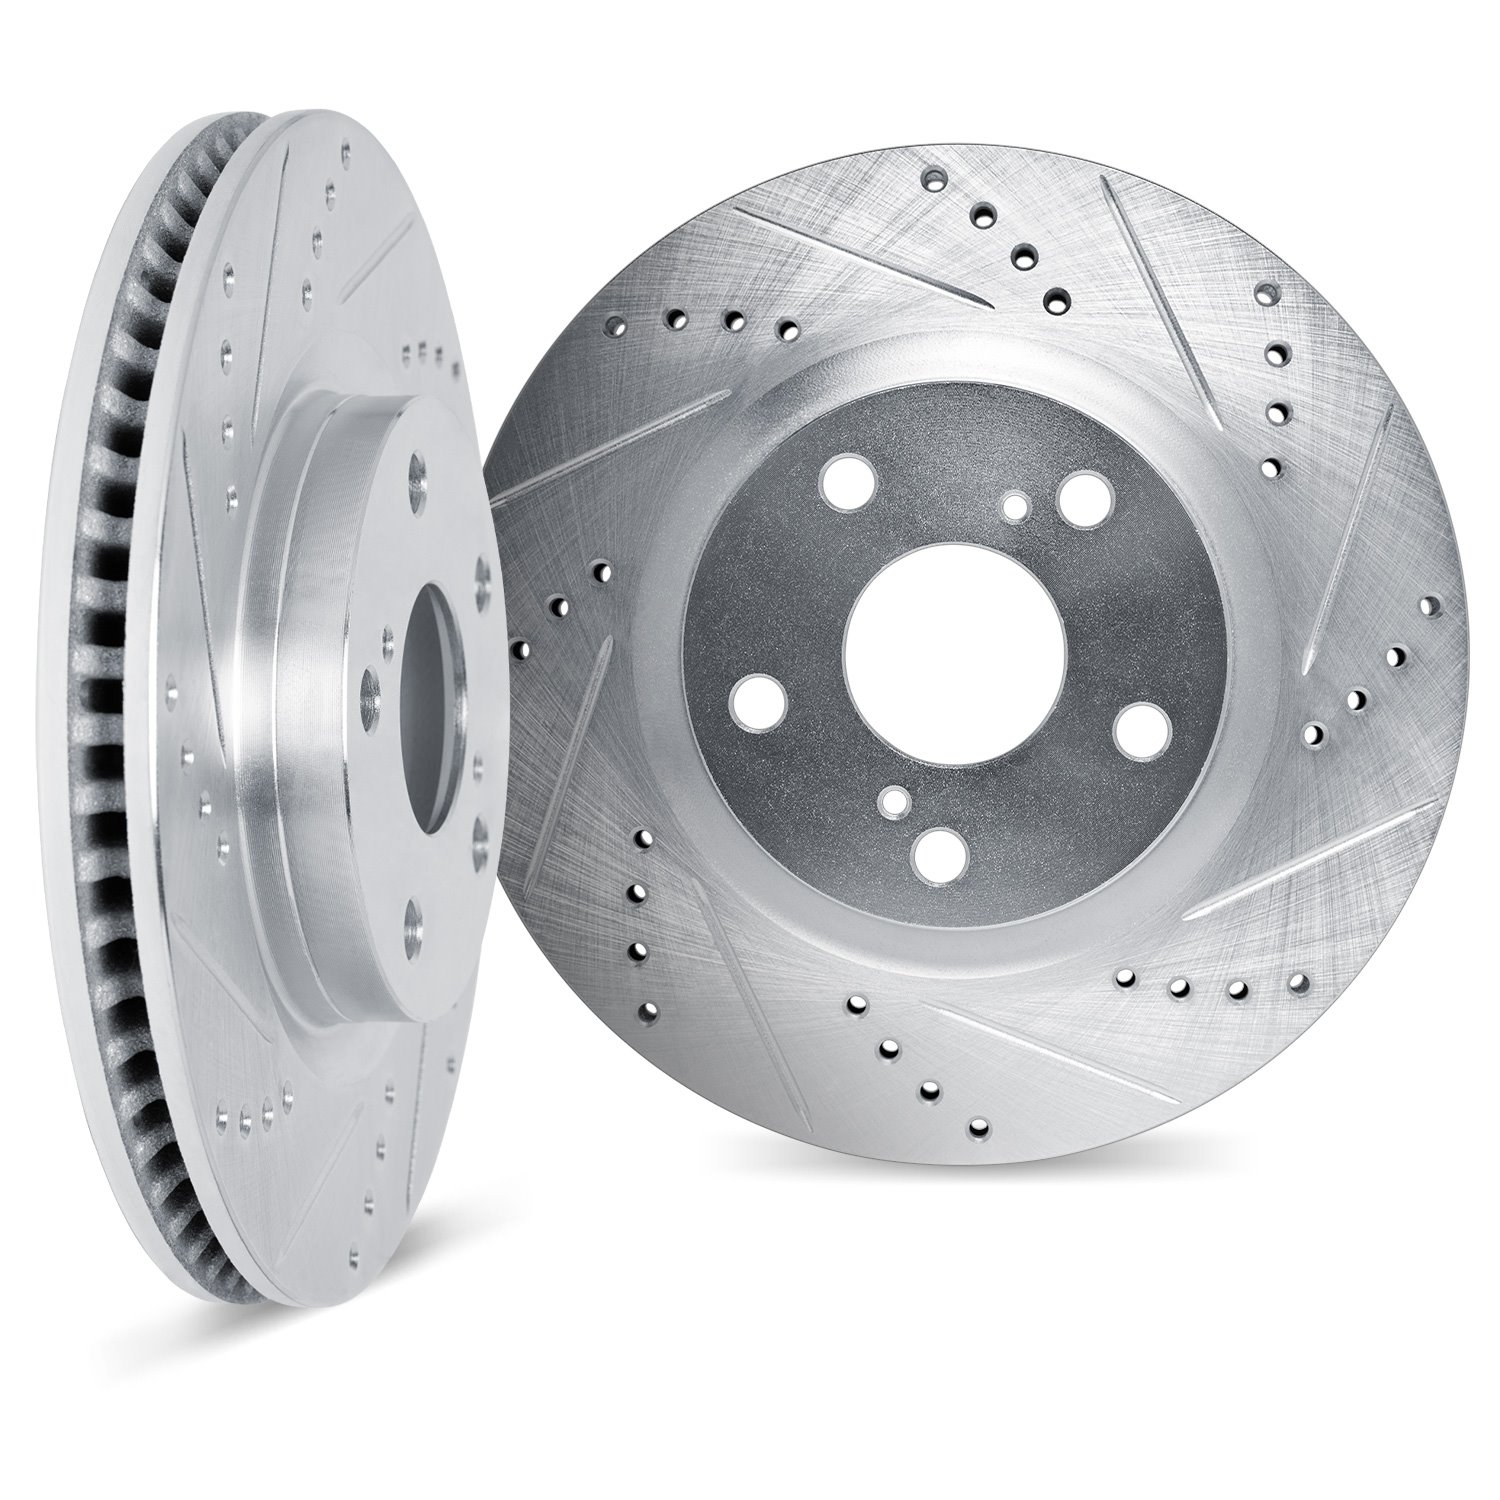 7002-02022 Drilled/Slotted Brake Rotors [Silver], Fits Select Multiple Makes/Models, Position: Front